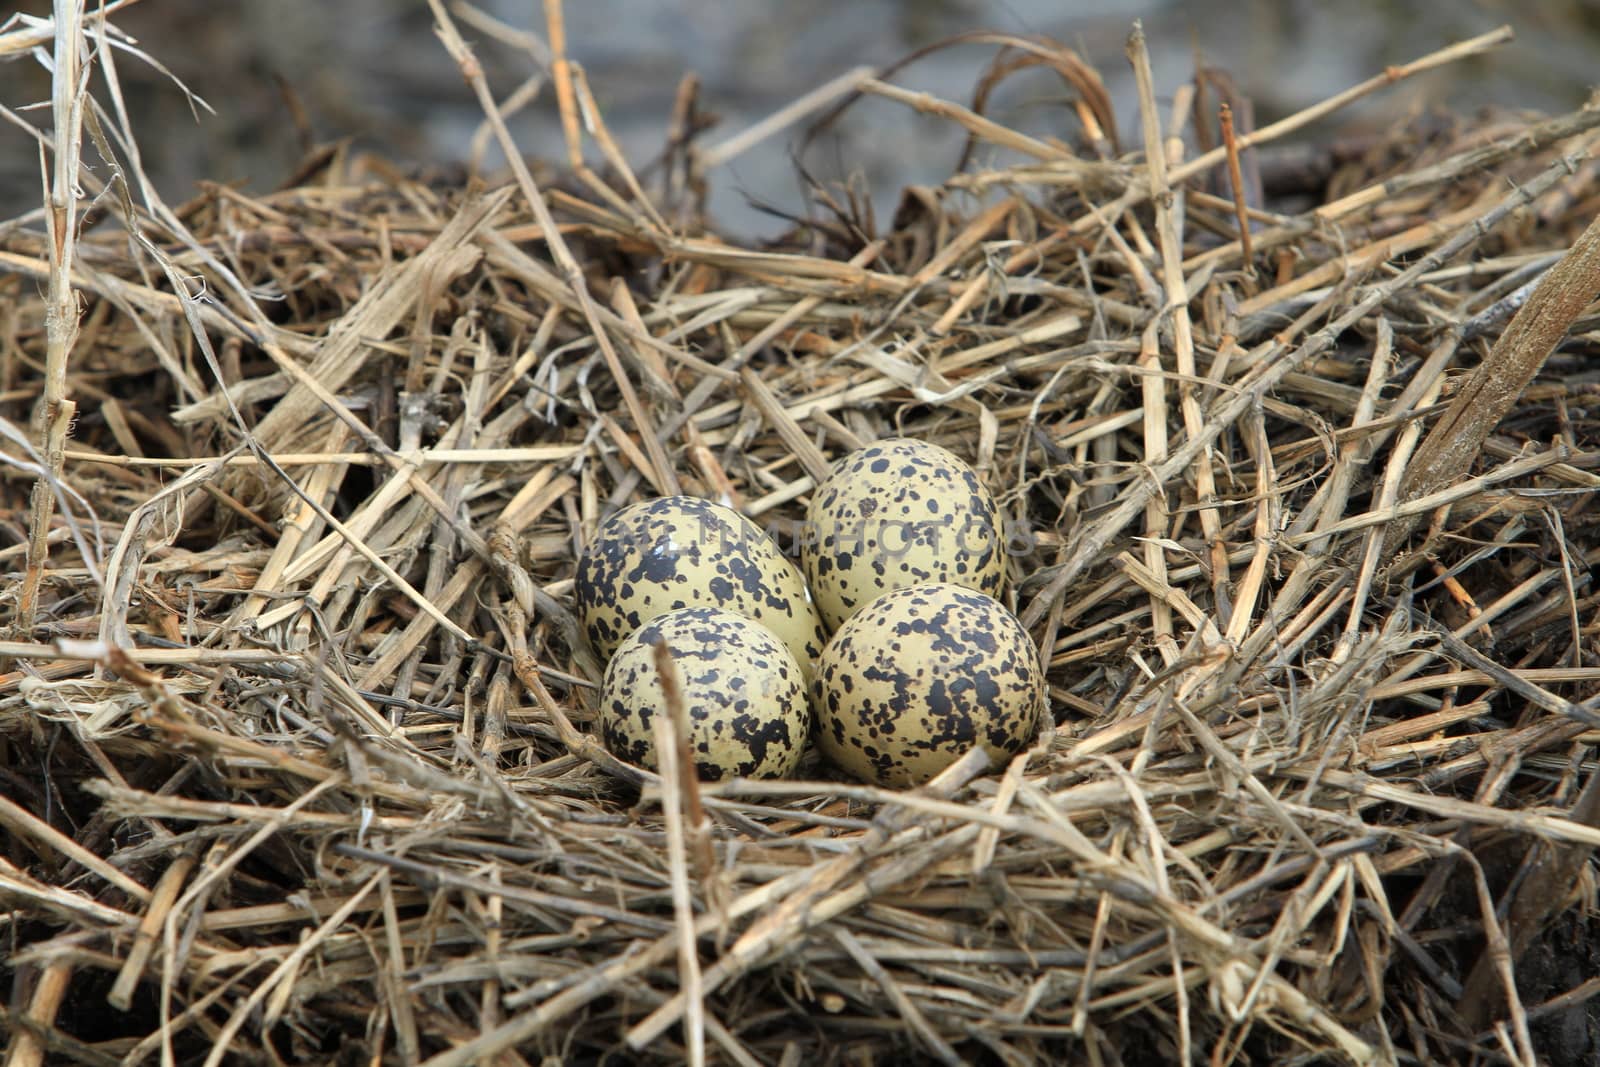 A nest filled with four footprints bird eggs in the branches of a Nest from the straw, Thailand